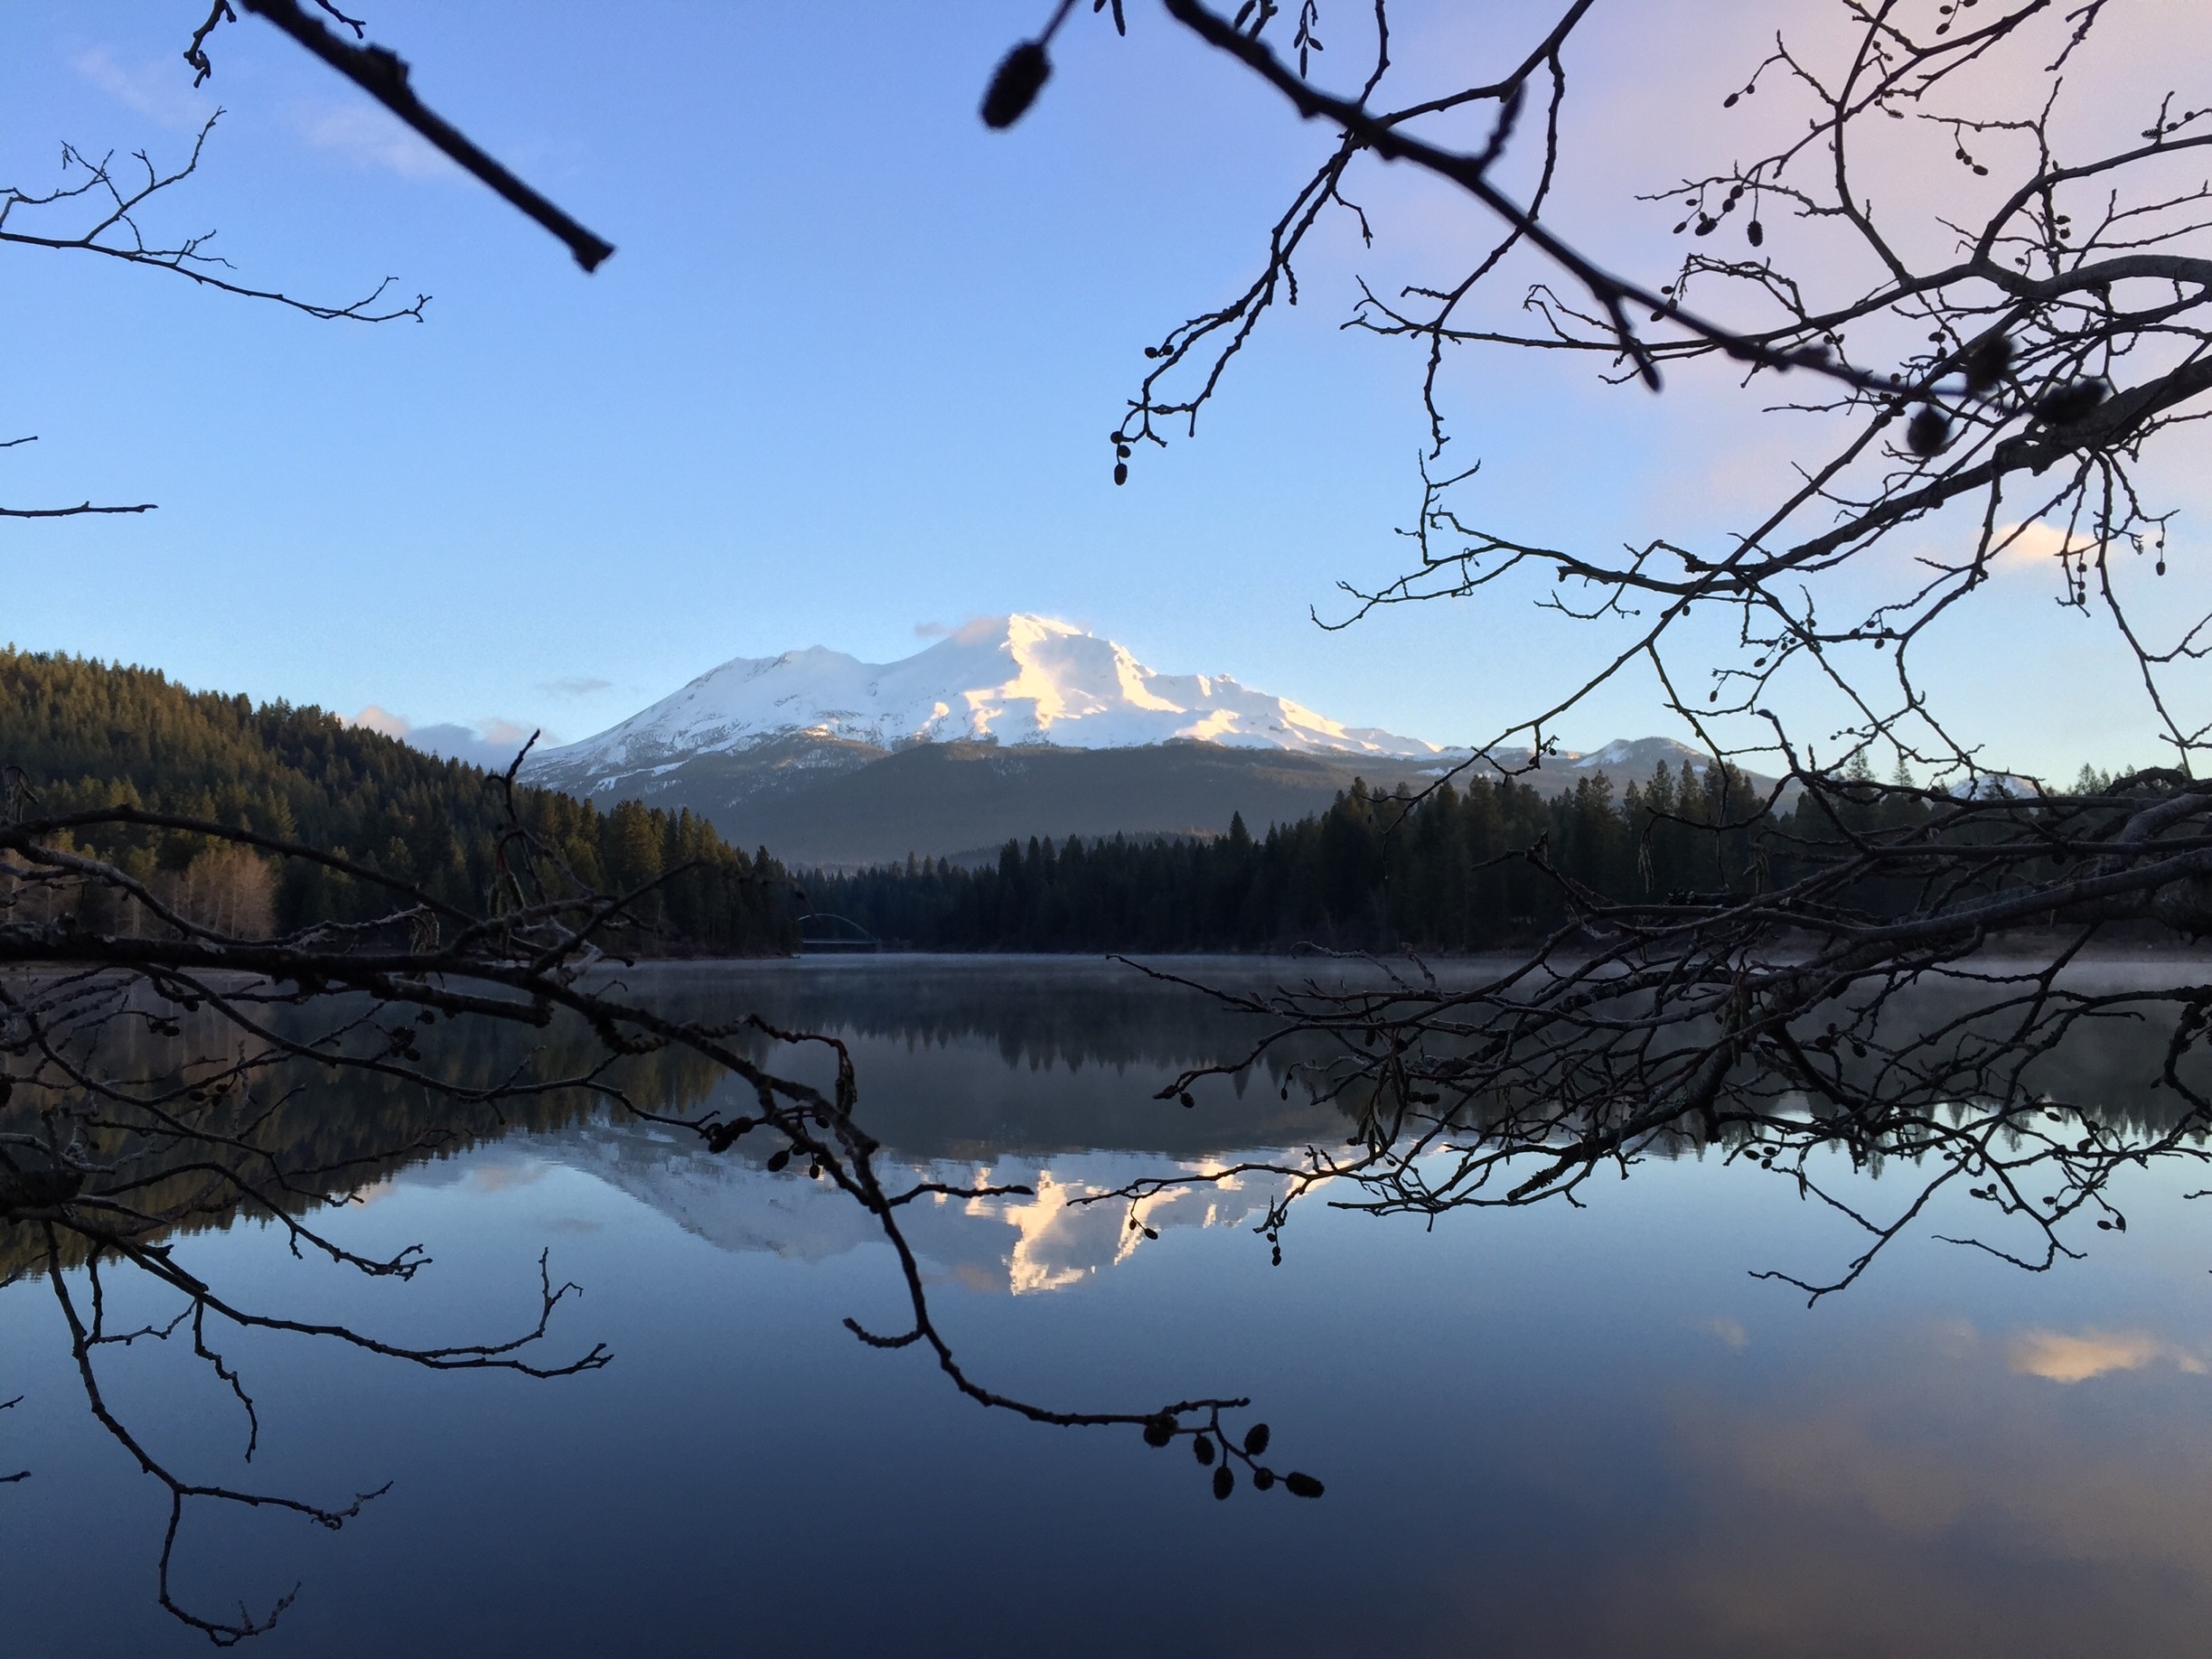 I stopped by Siskiyou lake for a beautiful reflection of Mt Shasta 
Photo taken iPhone 28 Dec 2014 